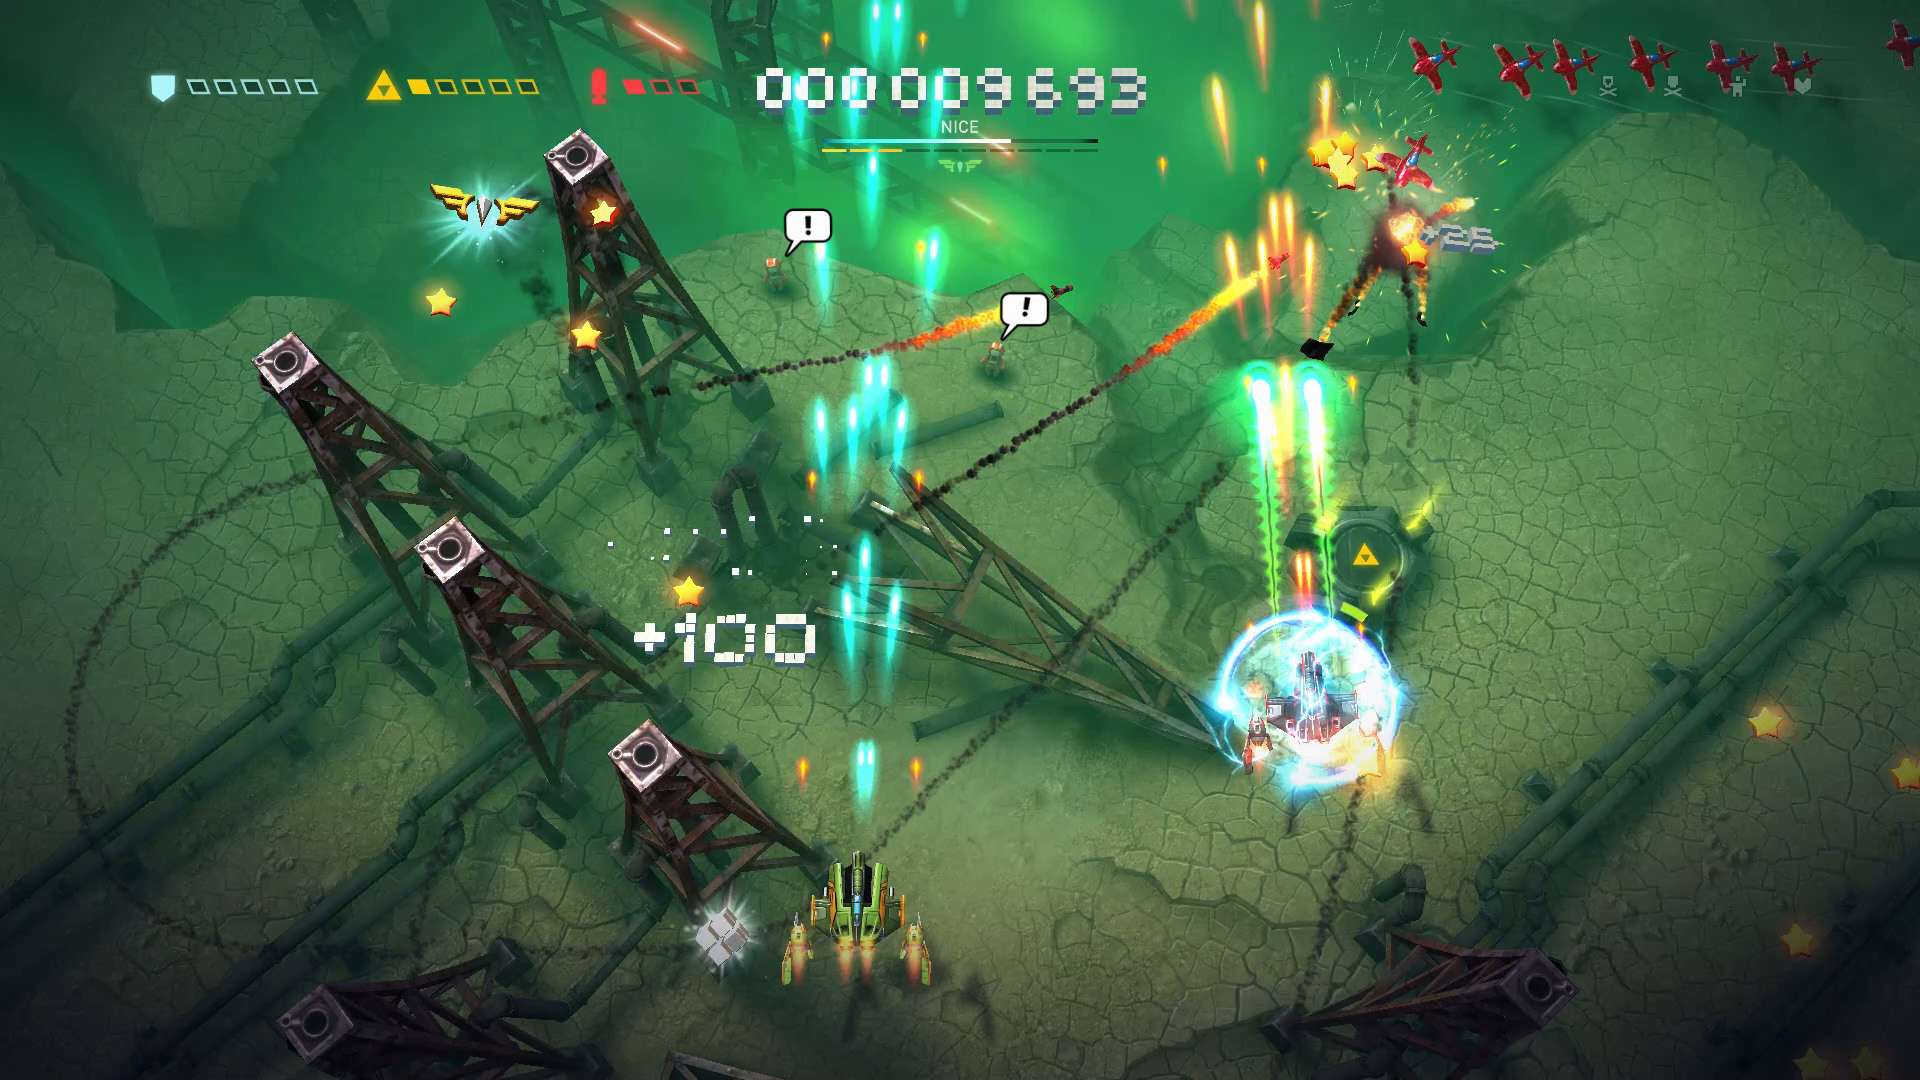 sky force reloaded tips xbox one